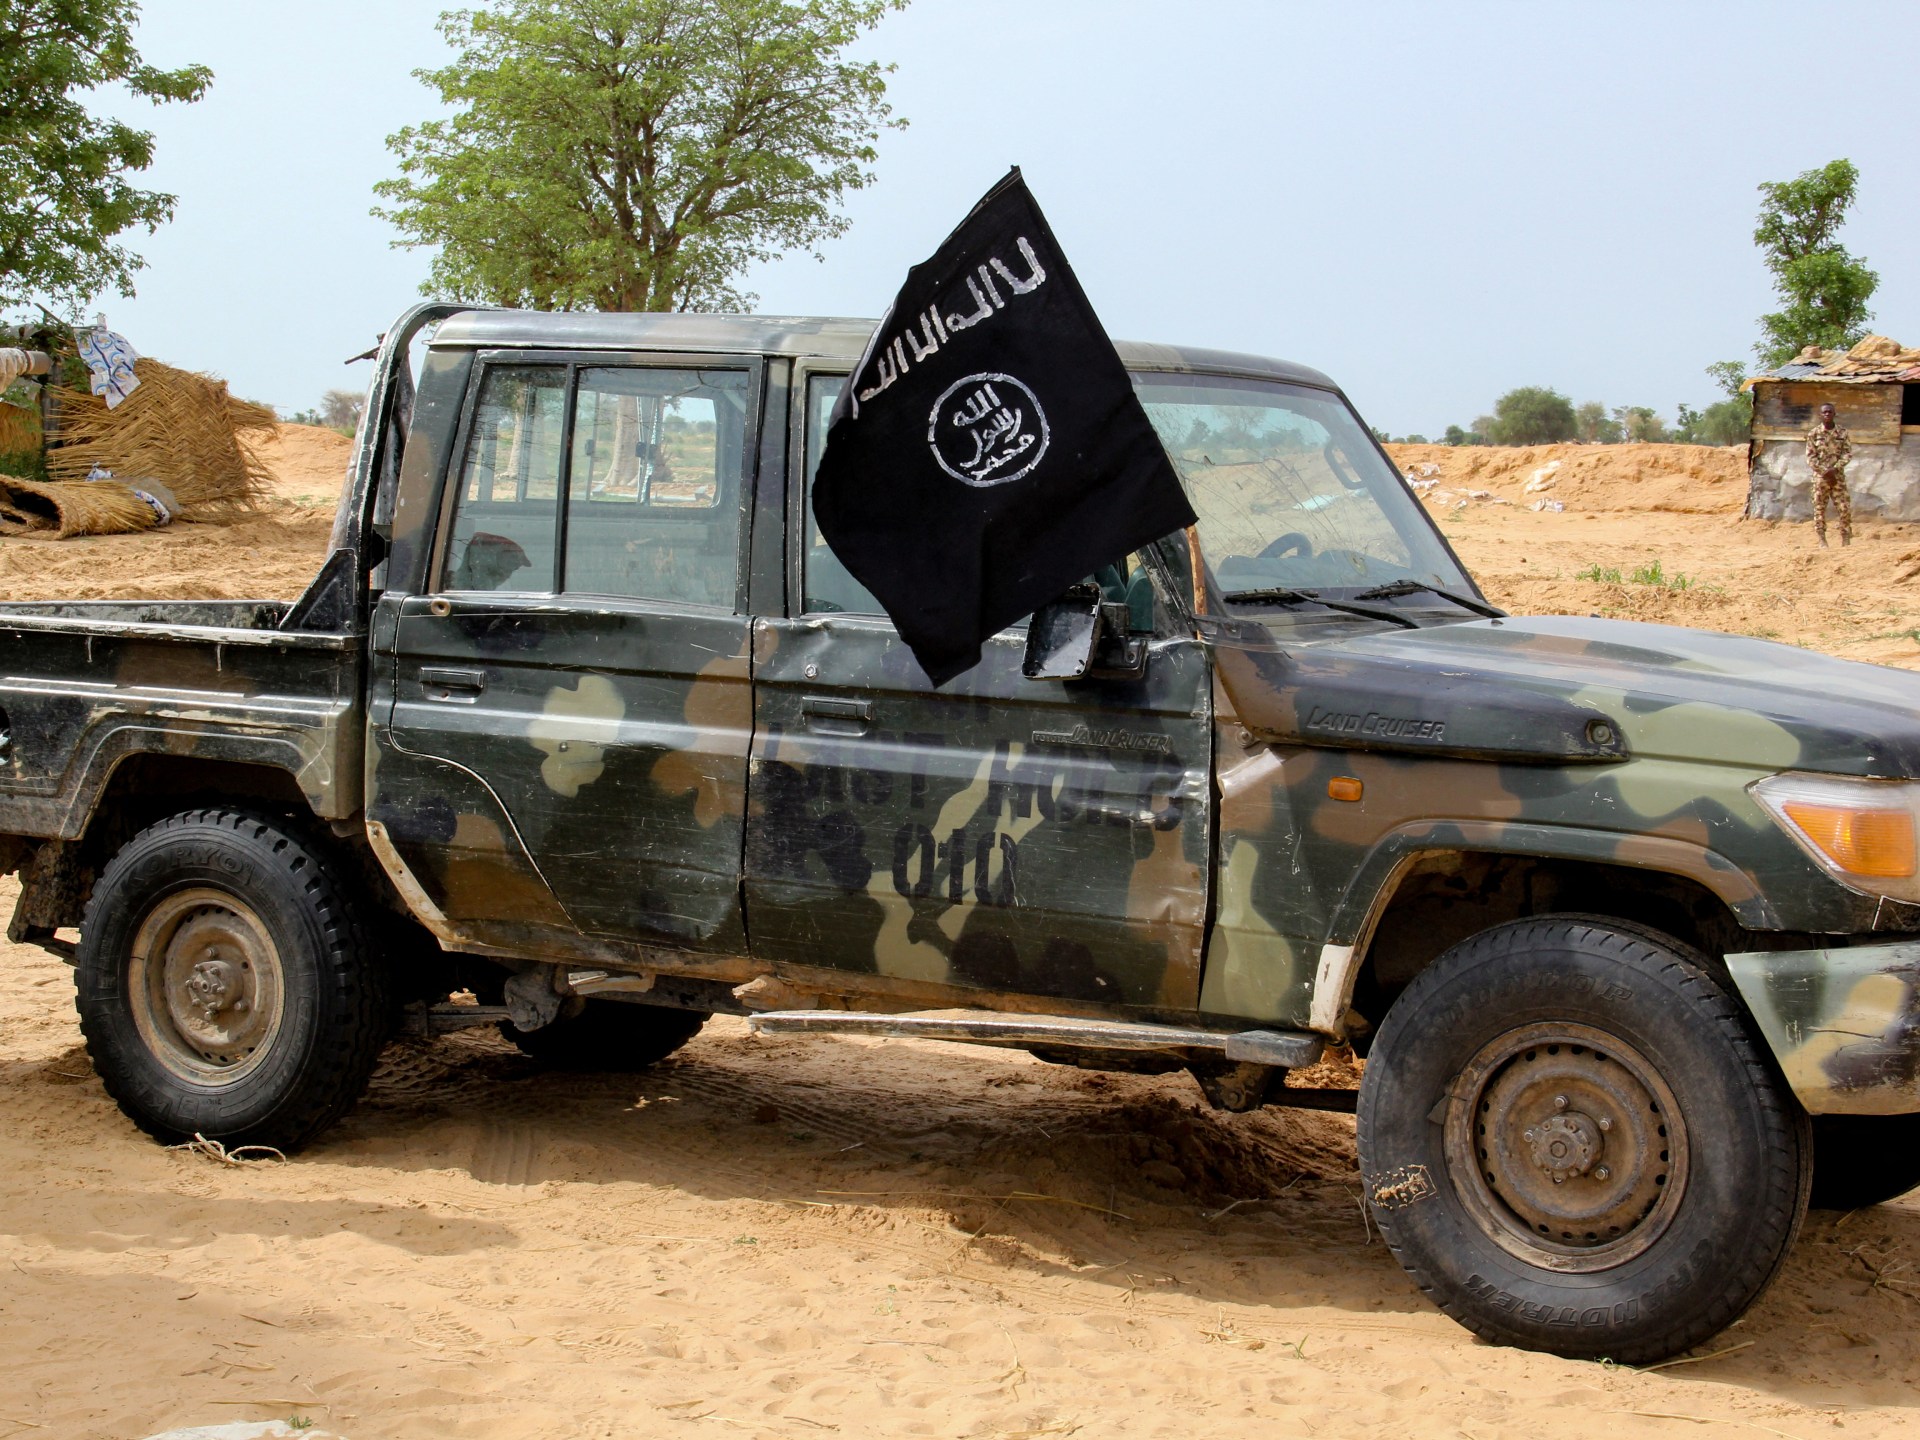 Rivalry among Boko Haram factions compounds violence in northern Nigeria | Armed Groups